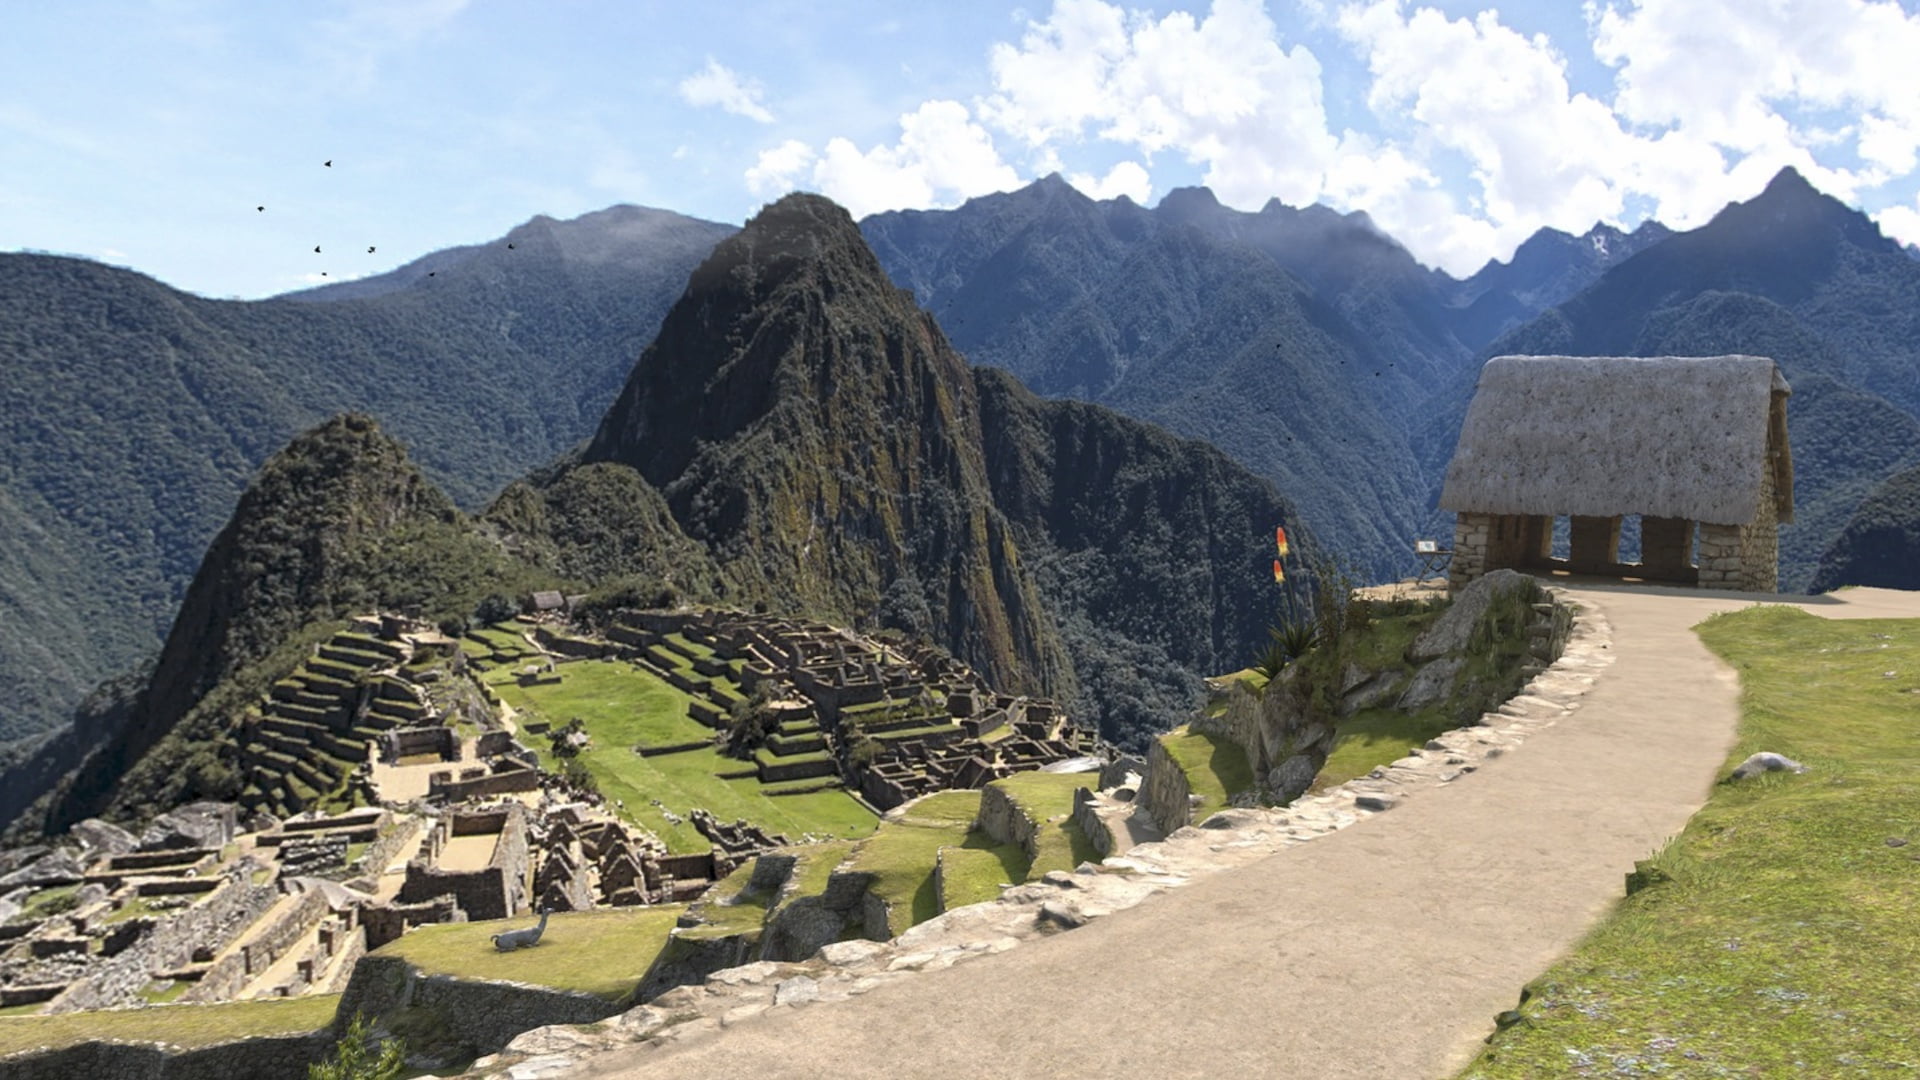 View of Machu Picchu from a terraced hill.